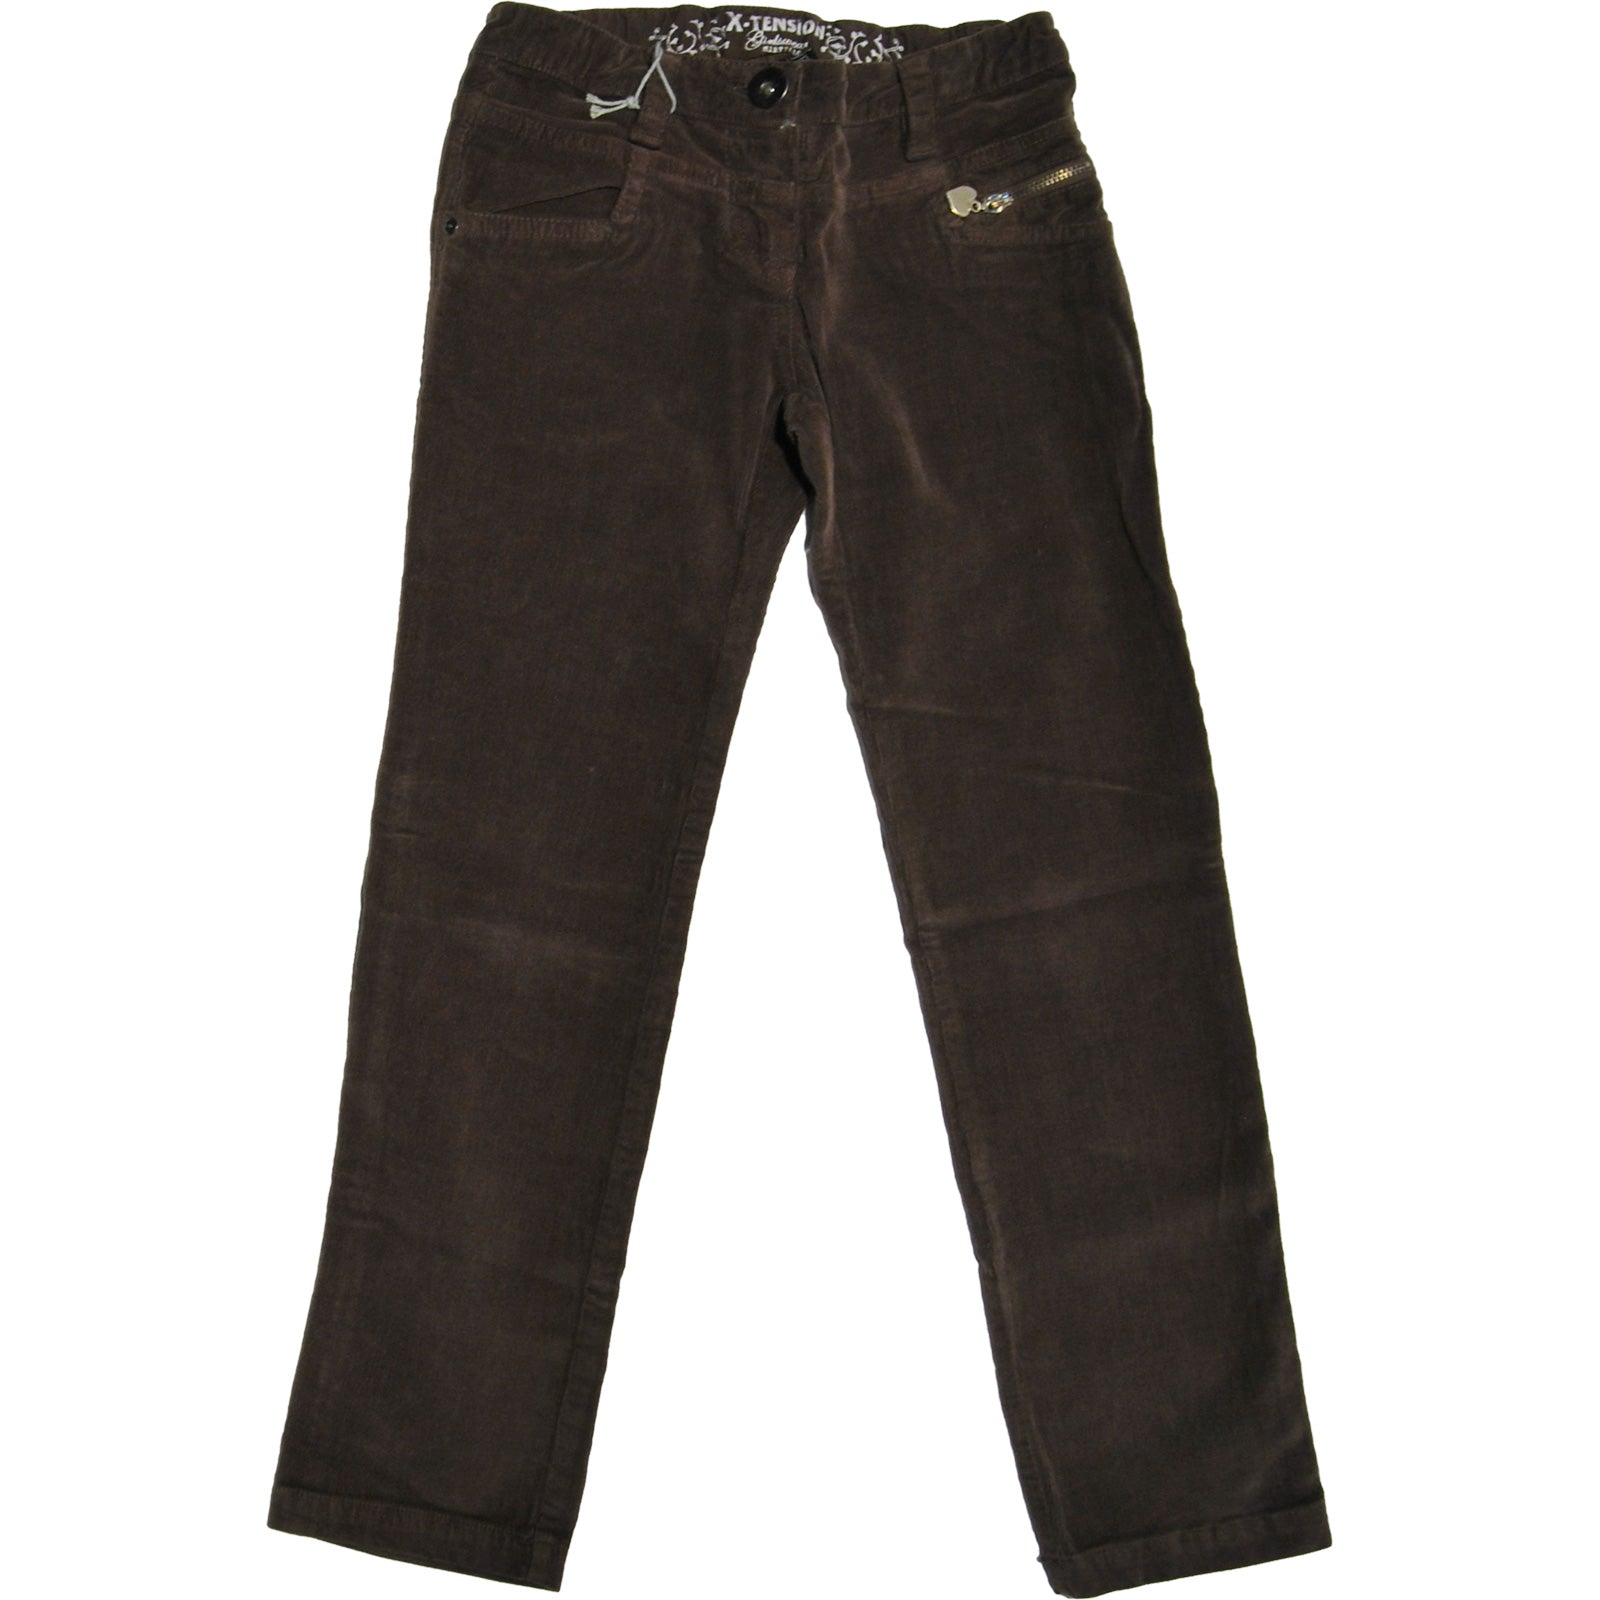 
  Velvet trousers from the girls' clothing line Mirtillo thin ribbed 5 pockets. Adjustable waist...